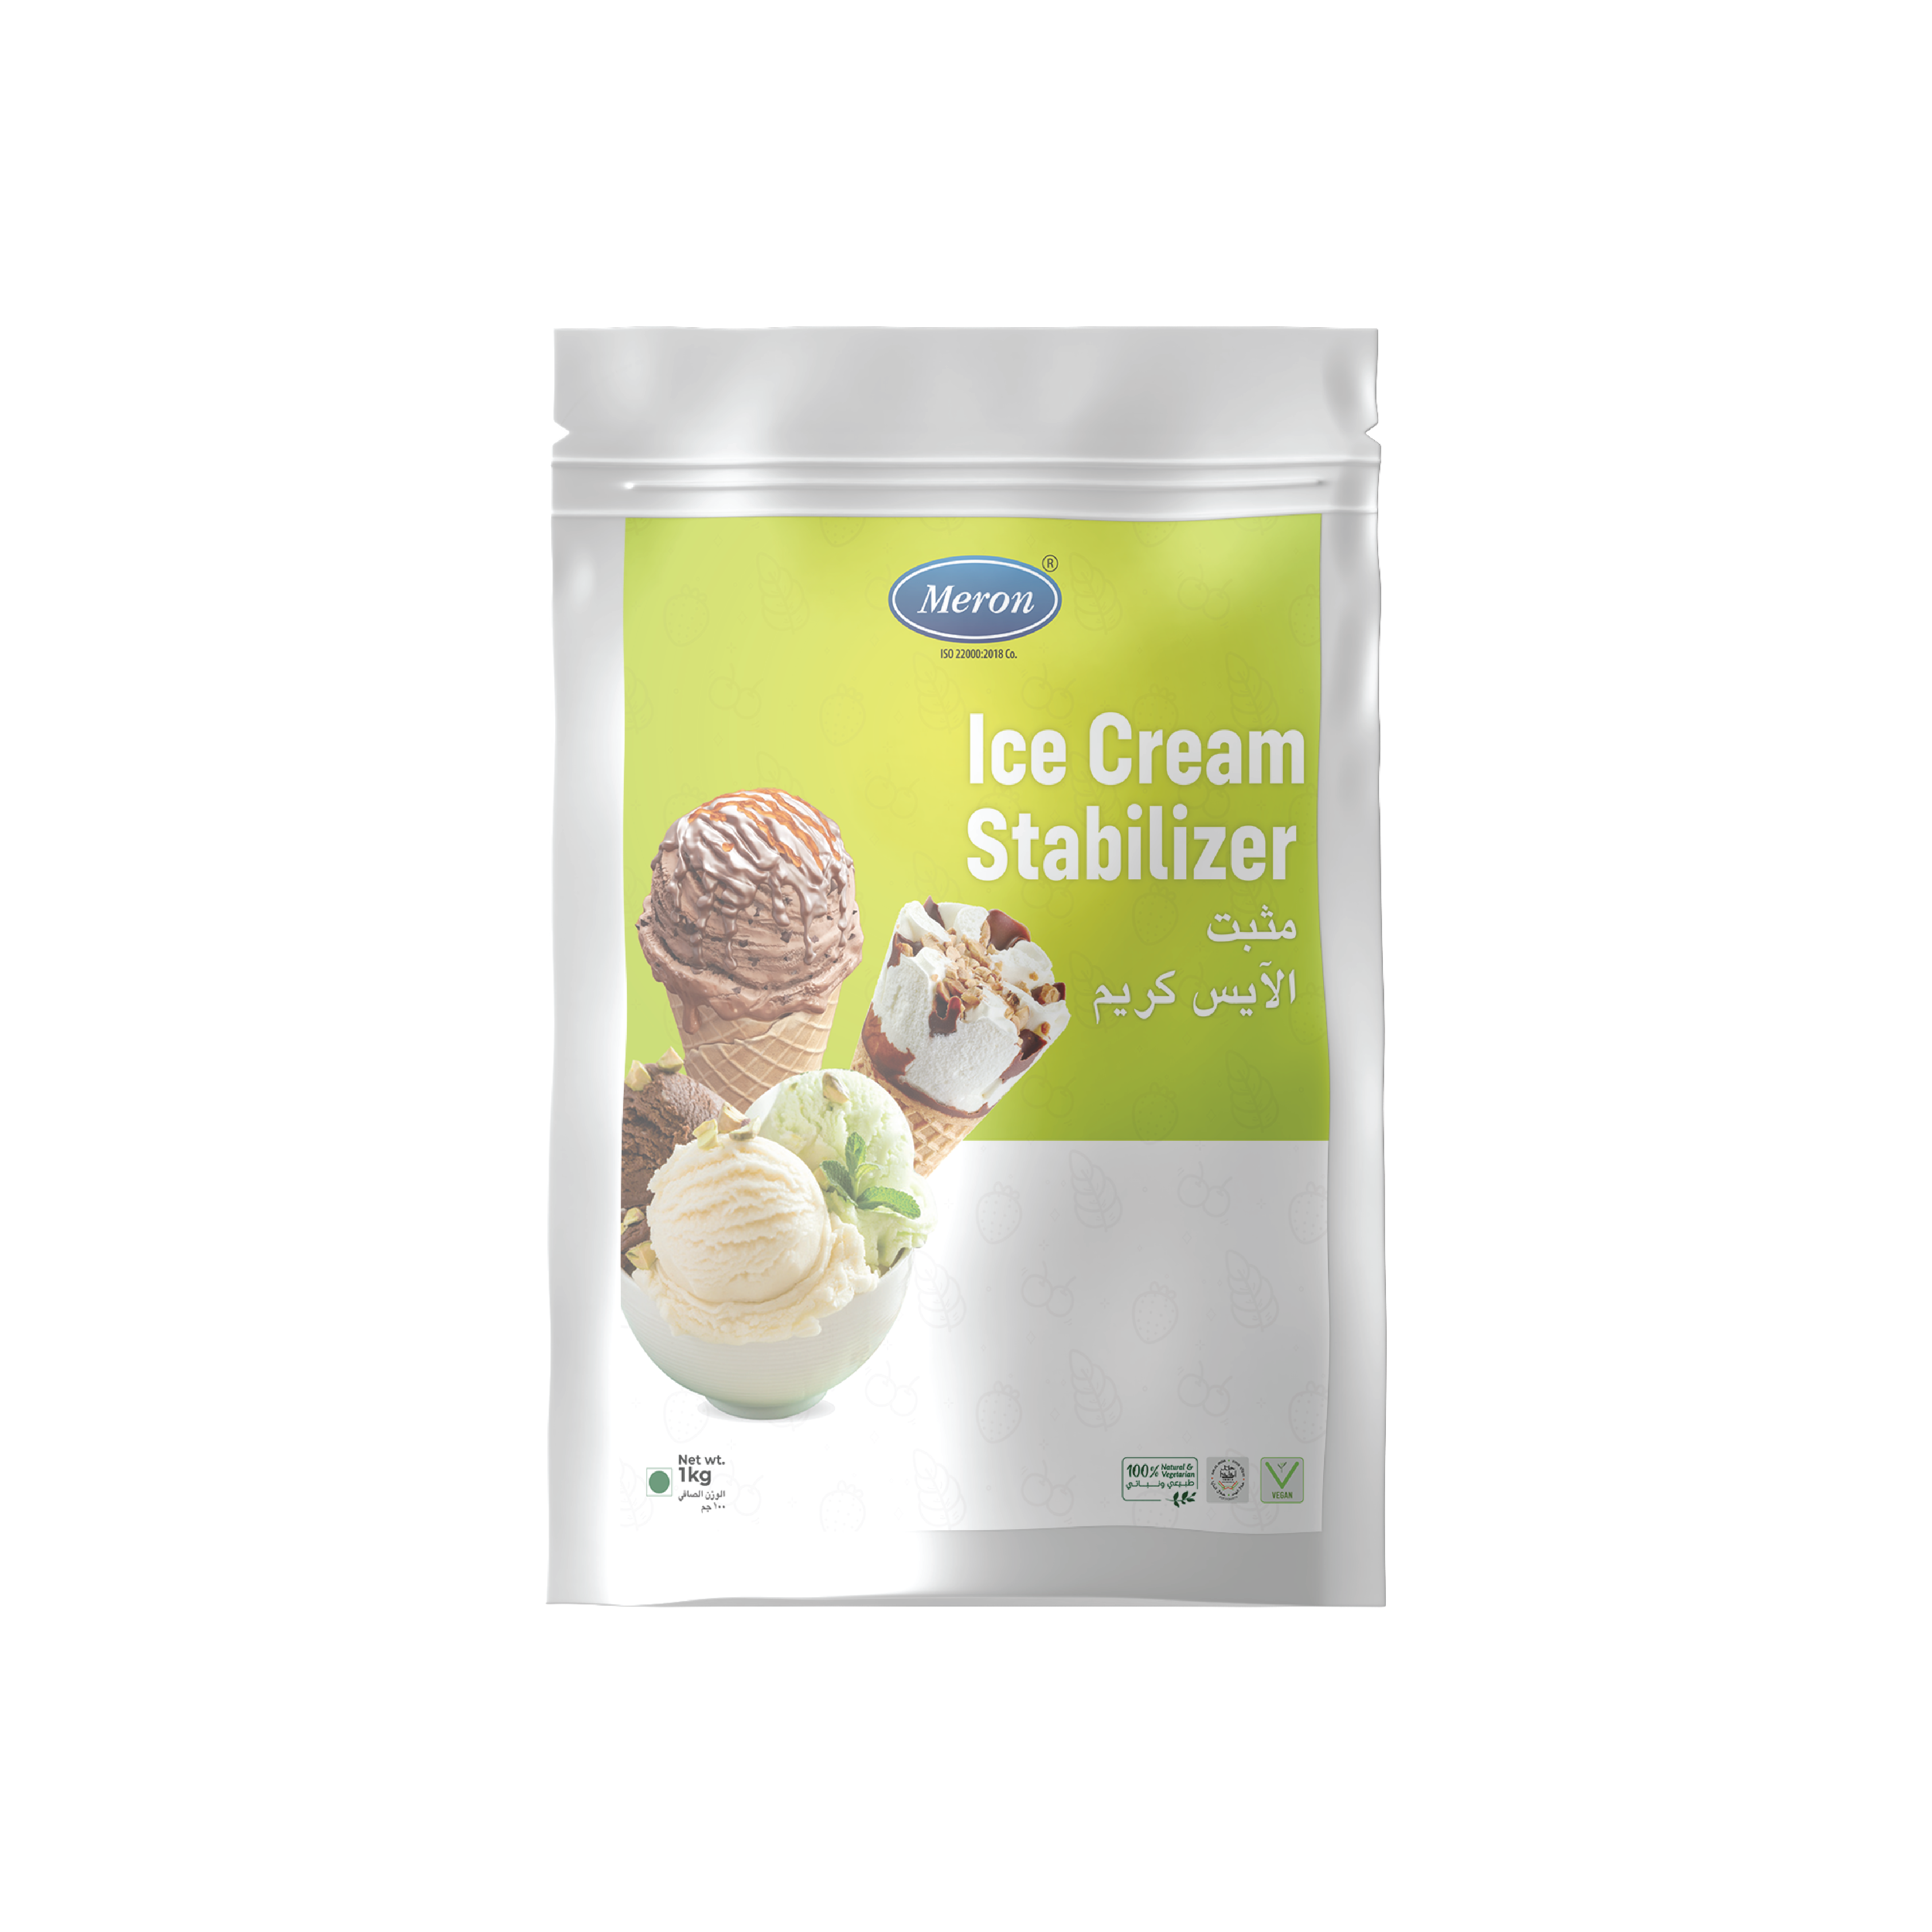 Ice Cream Stabiliser Cold 500g - Infusions Limited